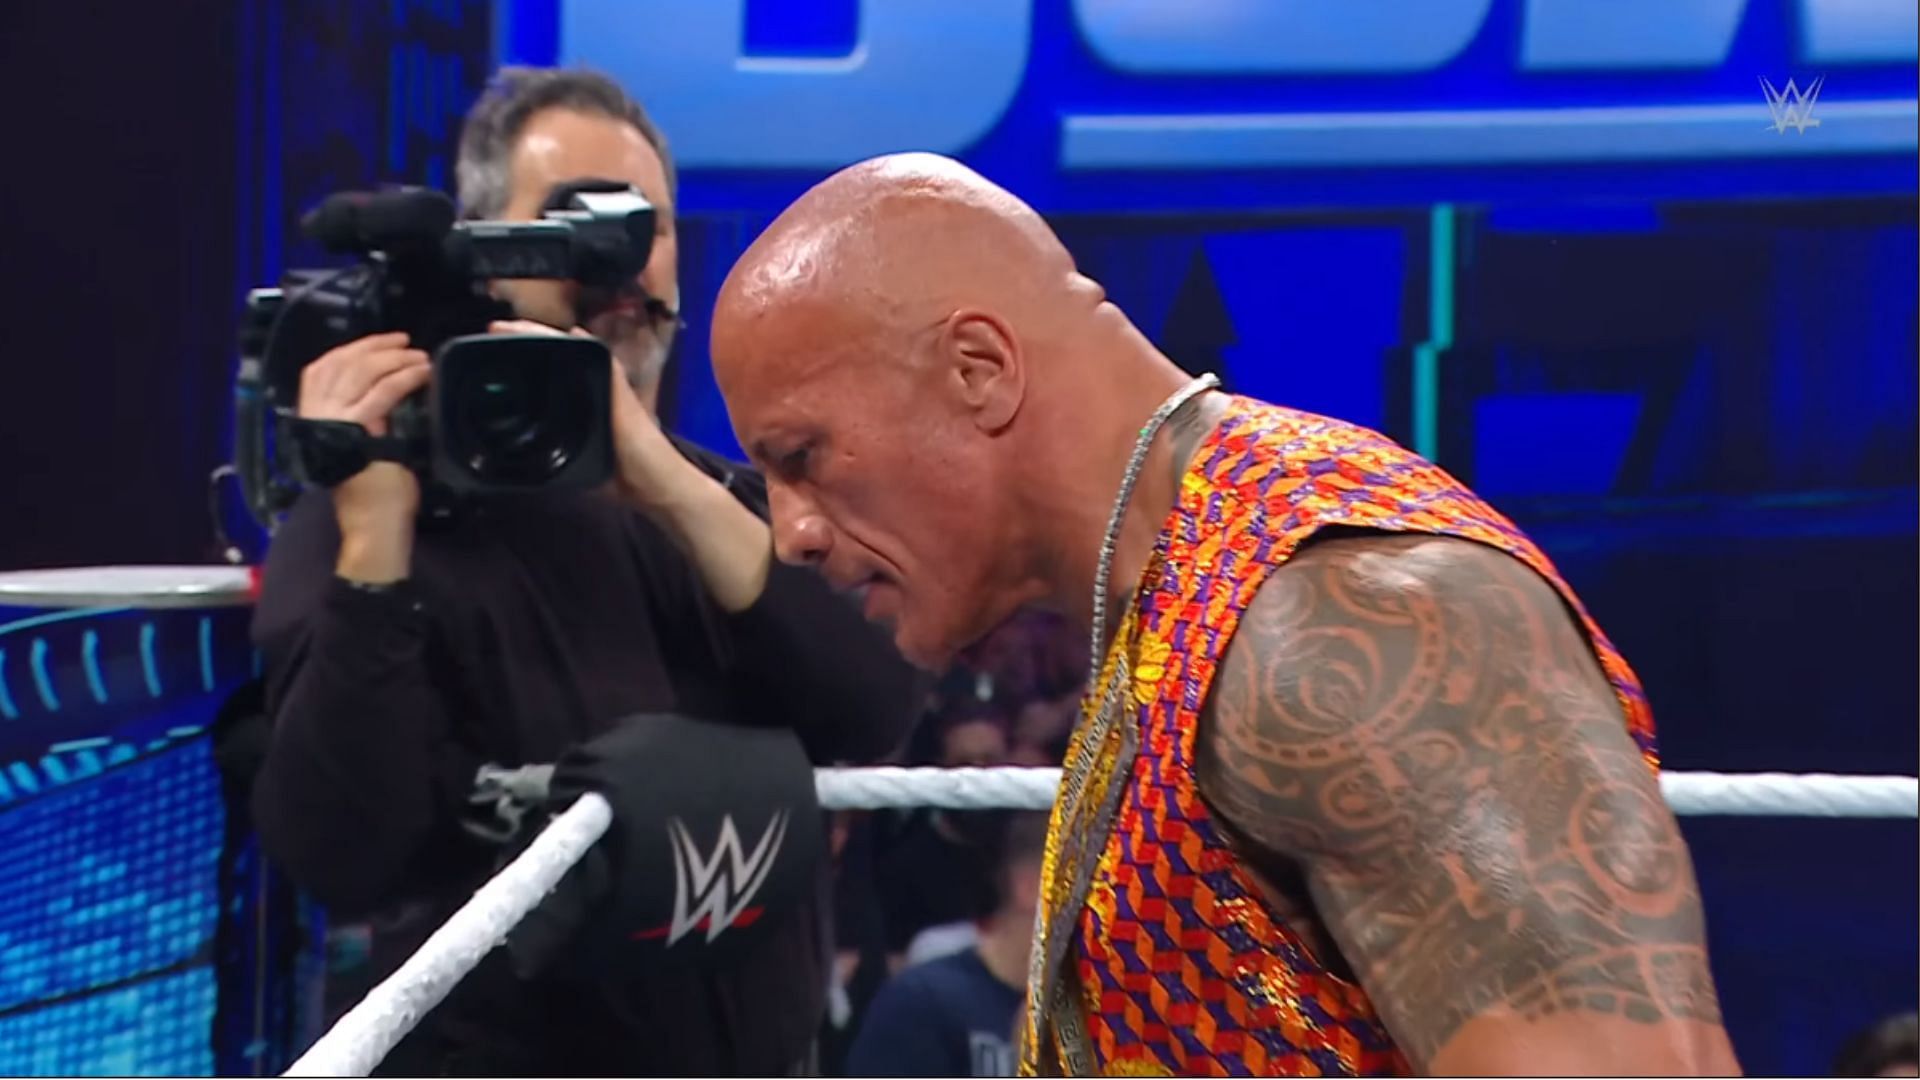 The Rock had a rather calm response to getting smacked across the face by the American Nightmare.